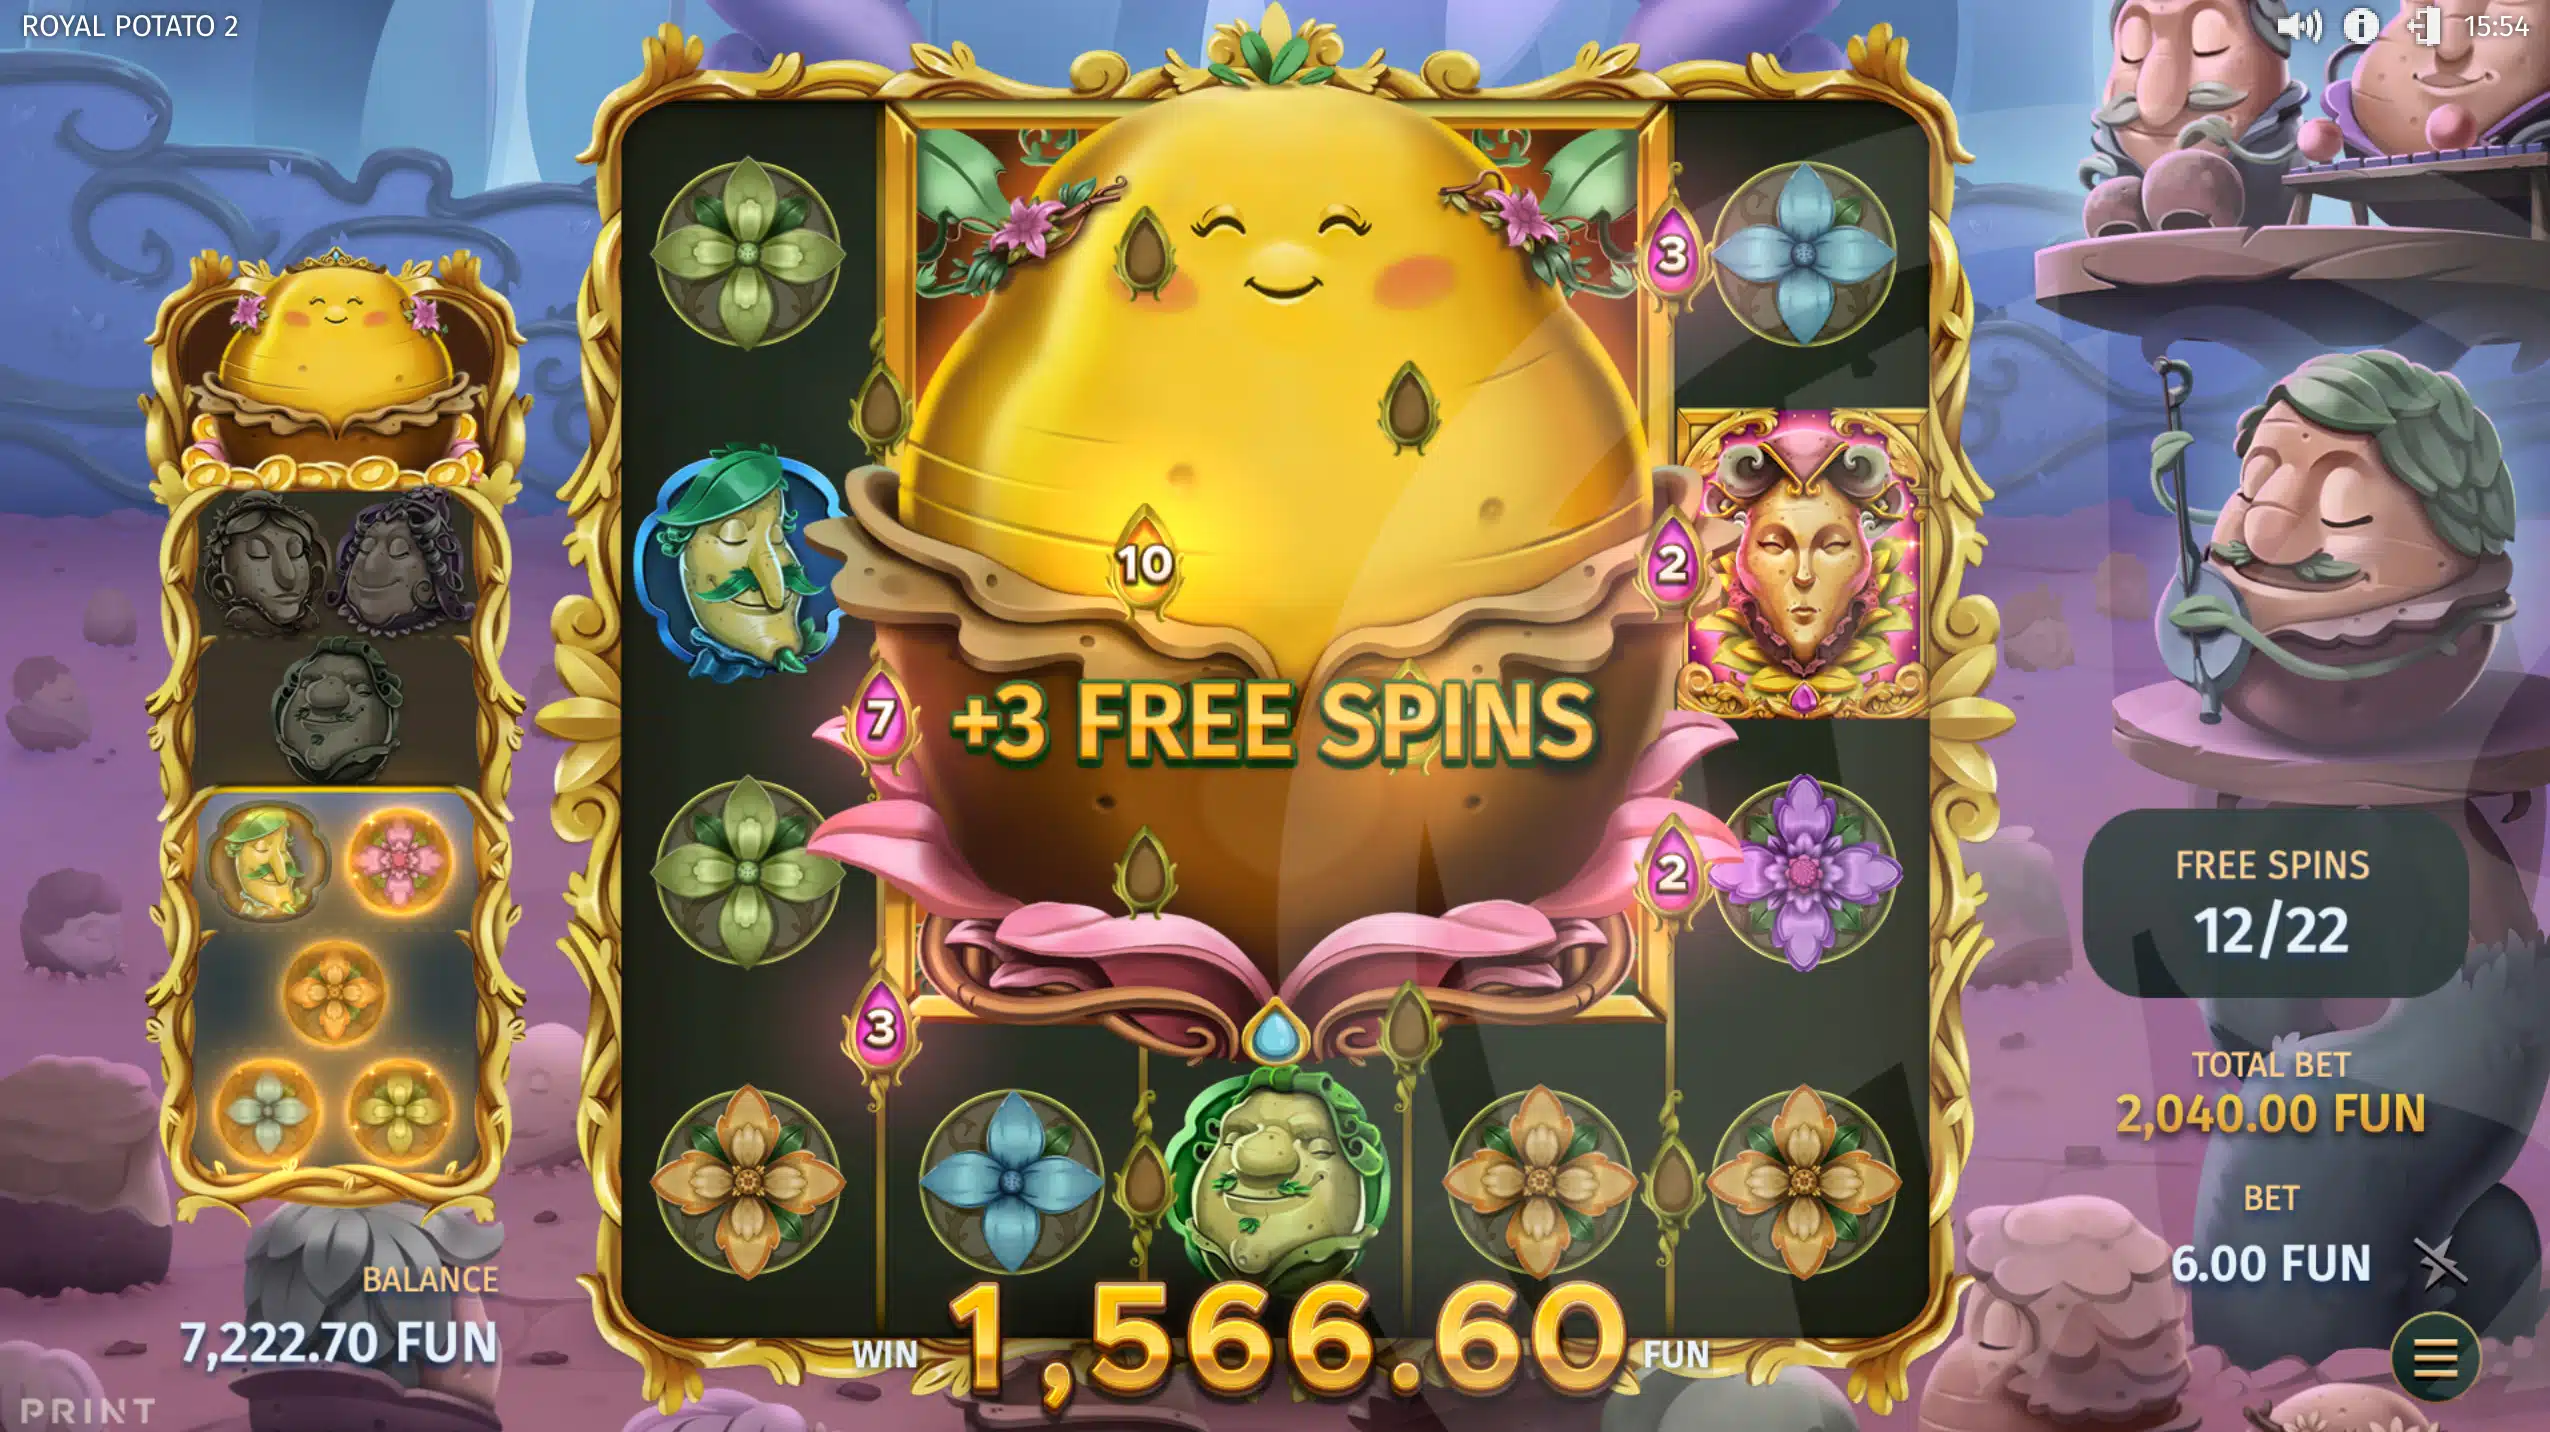 Achieve a Win on All Active Symbols to Increase the Jumbo Symbol Size and Trigger Additional Spins